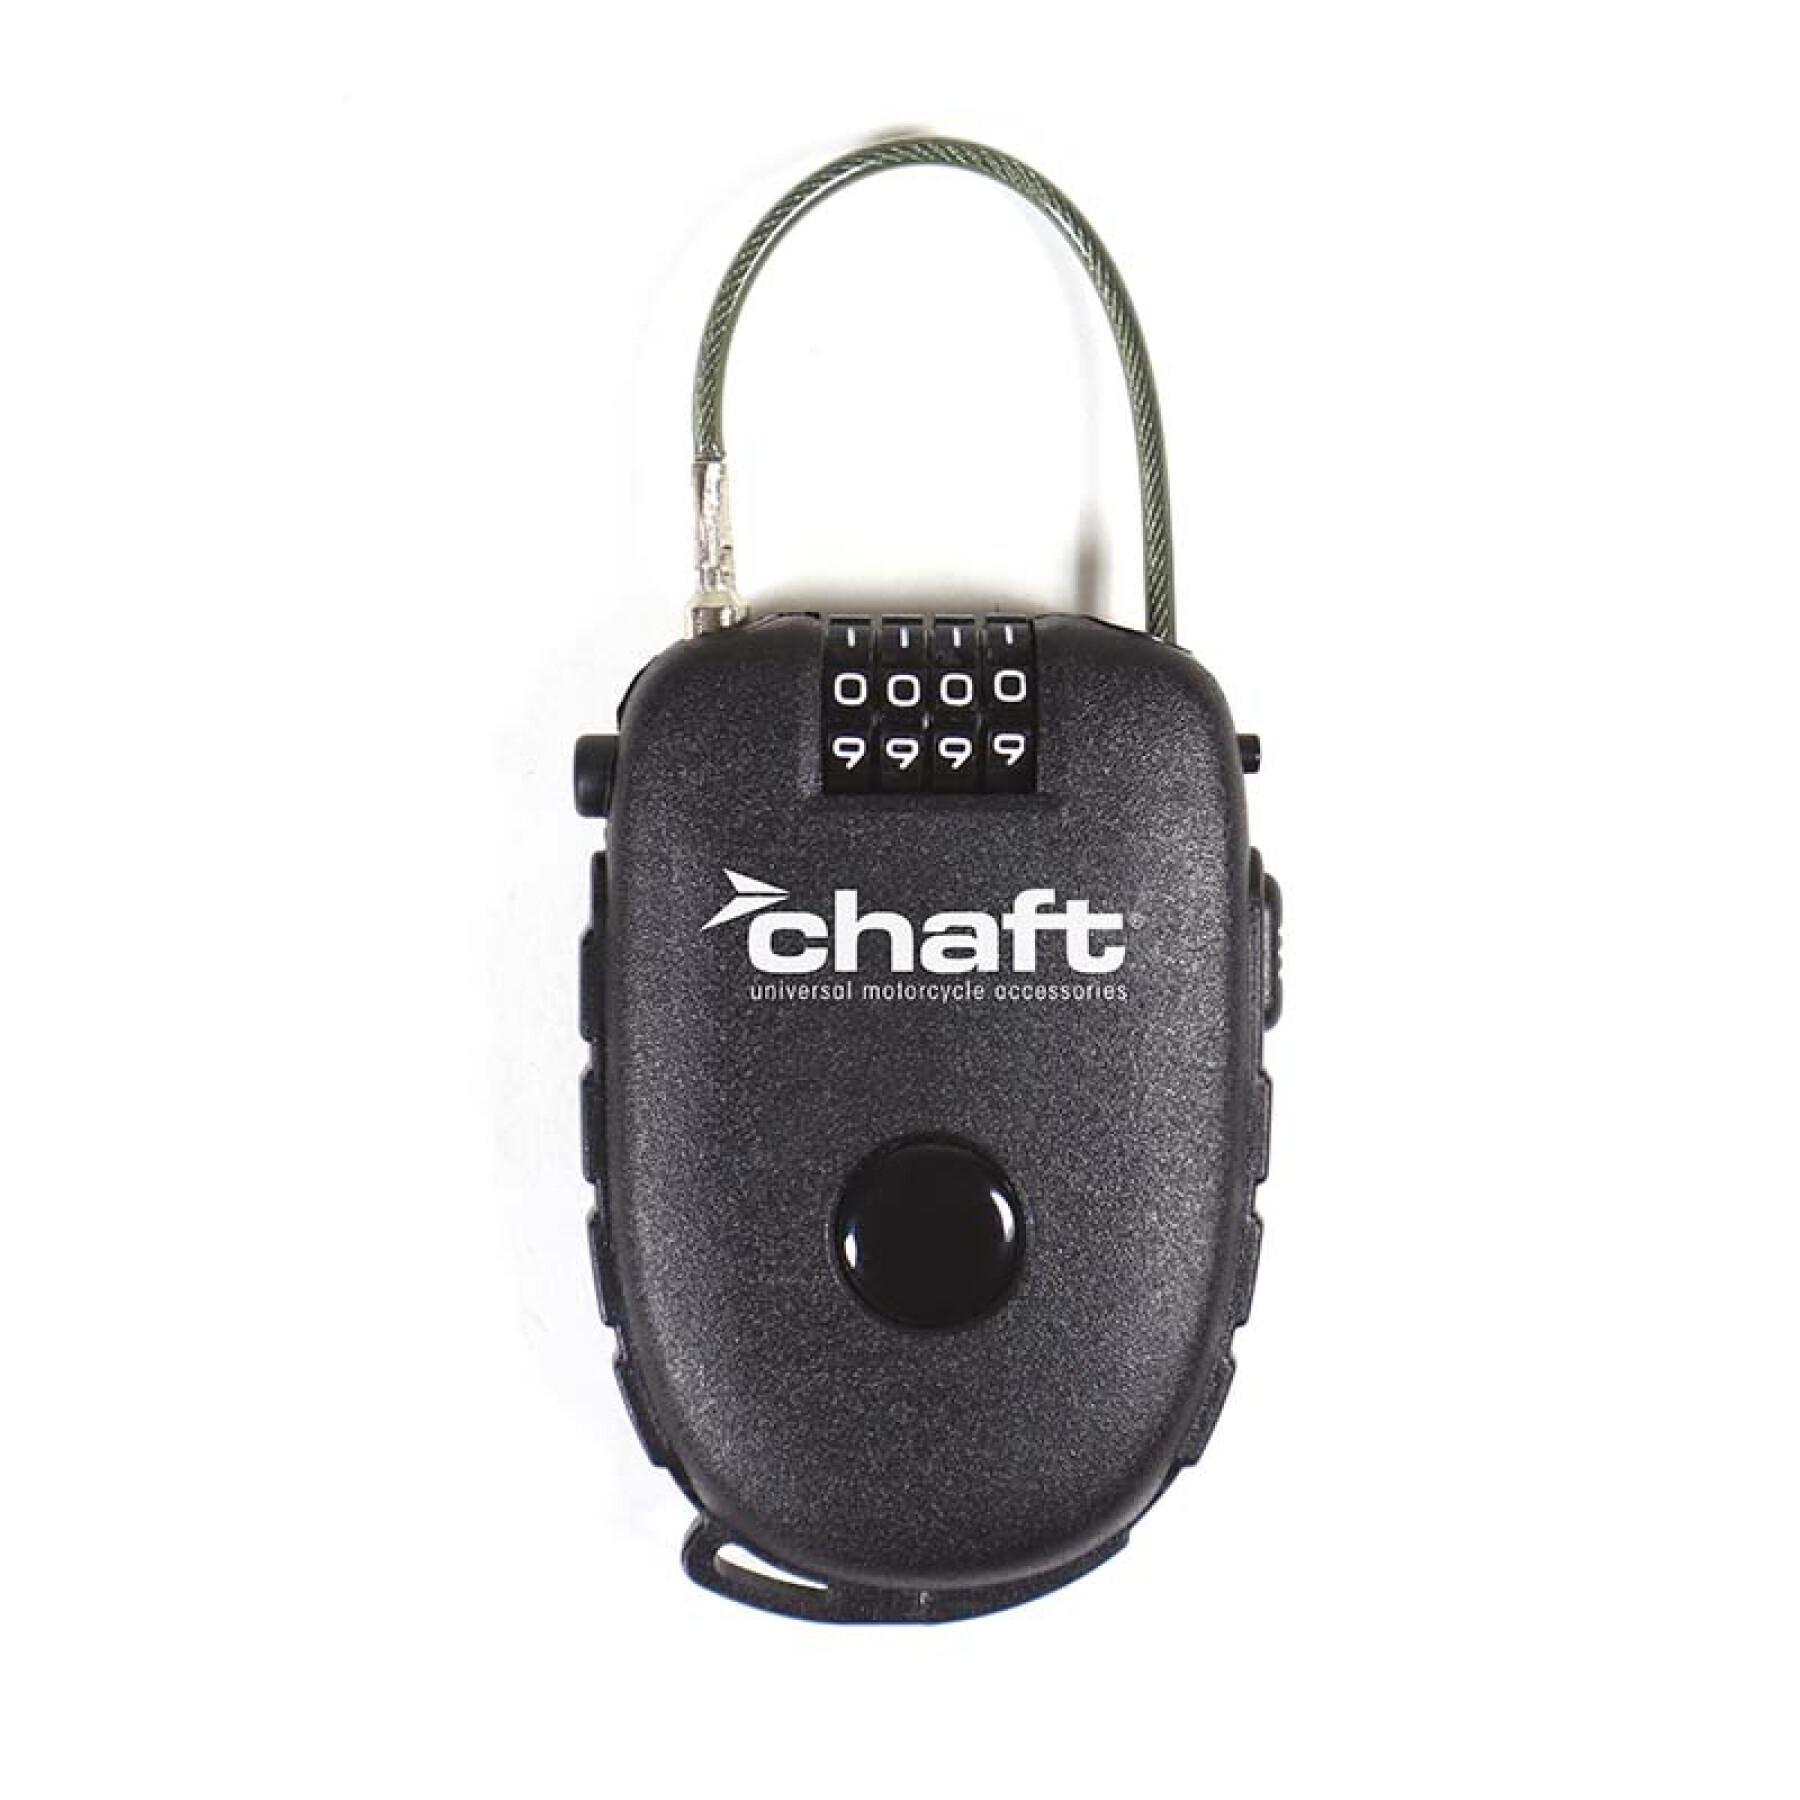 Anti-theft cable Chaft Lock